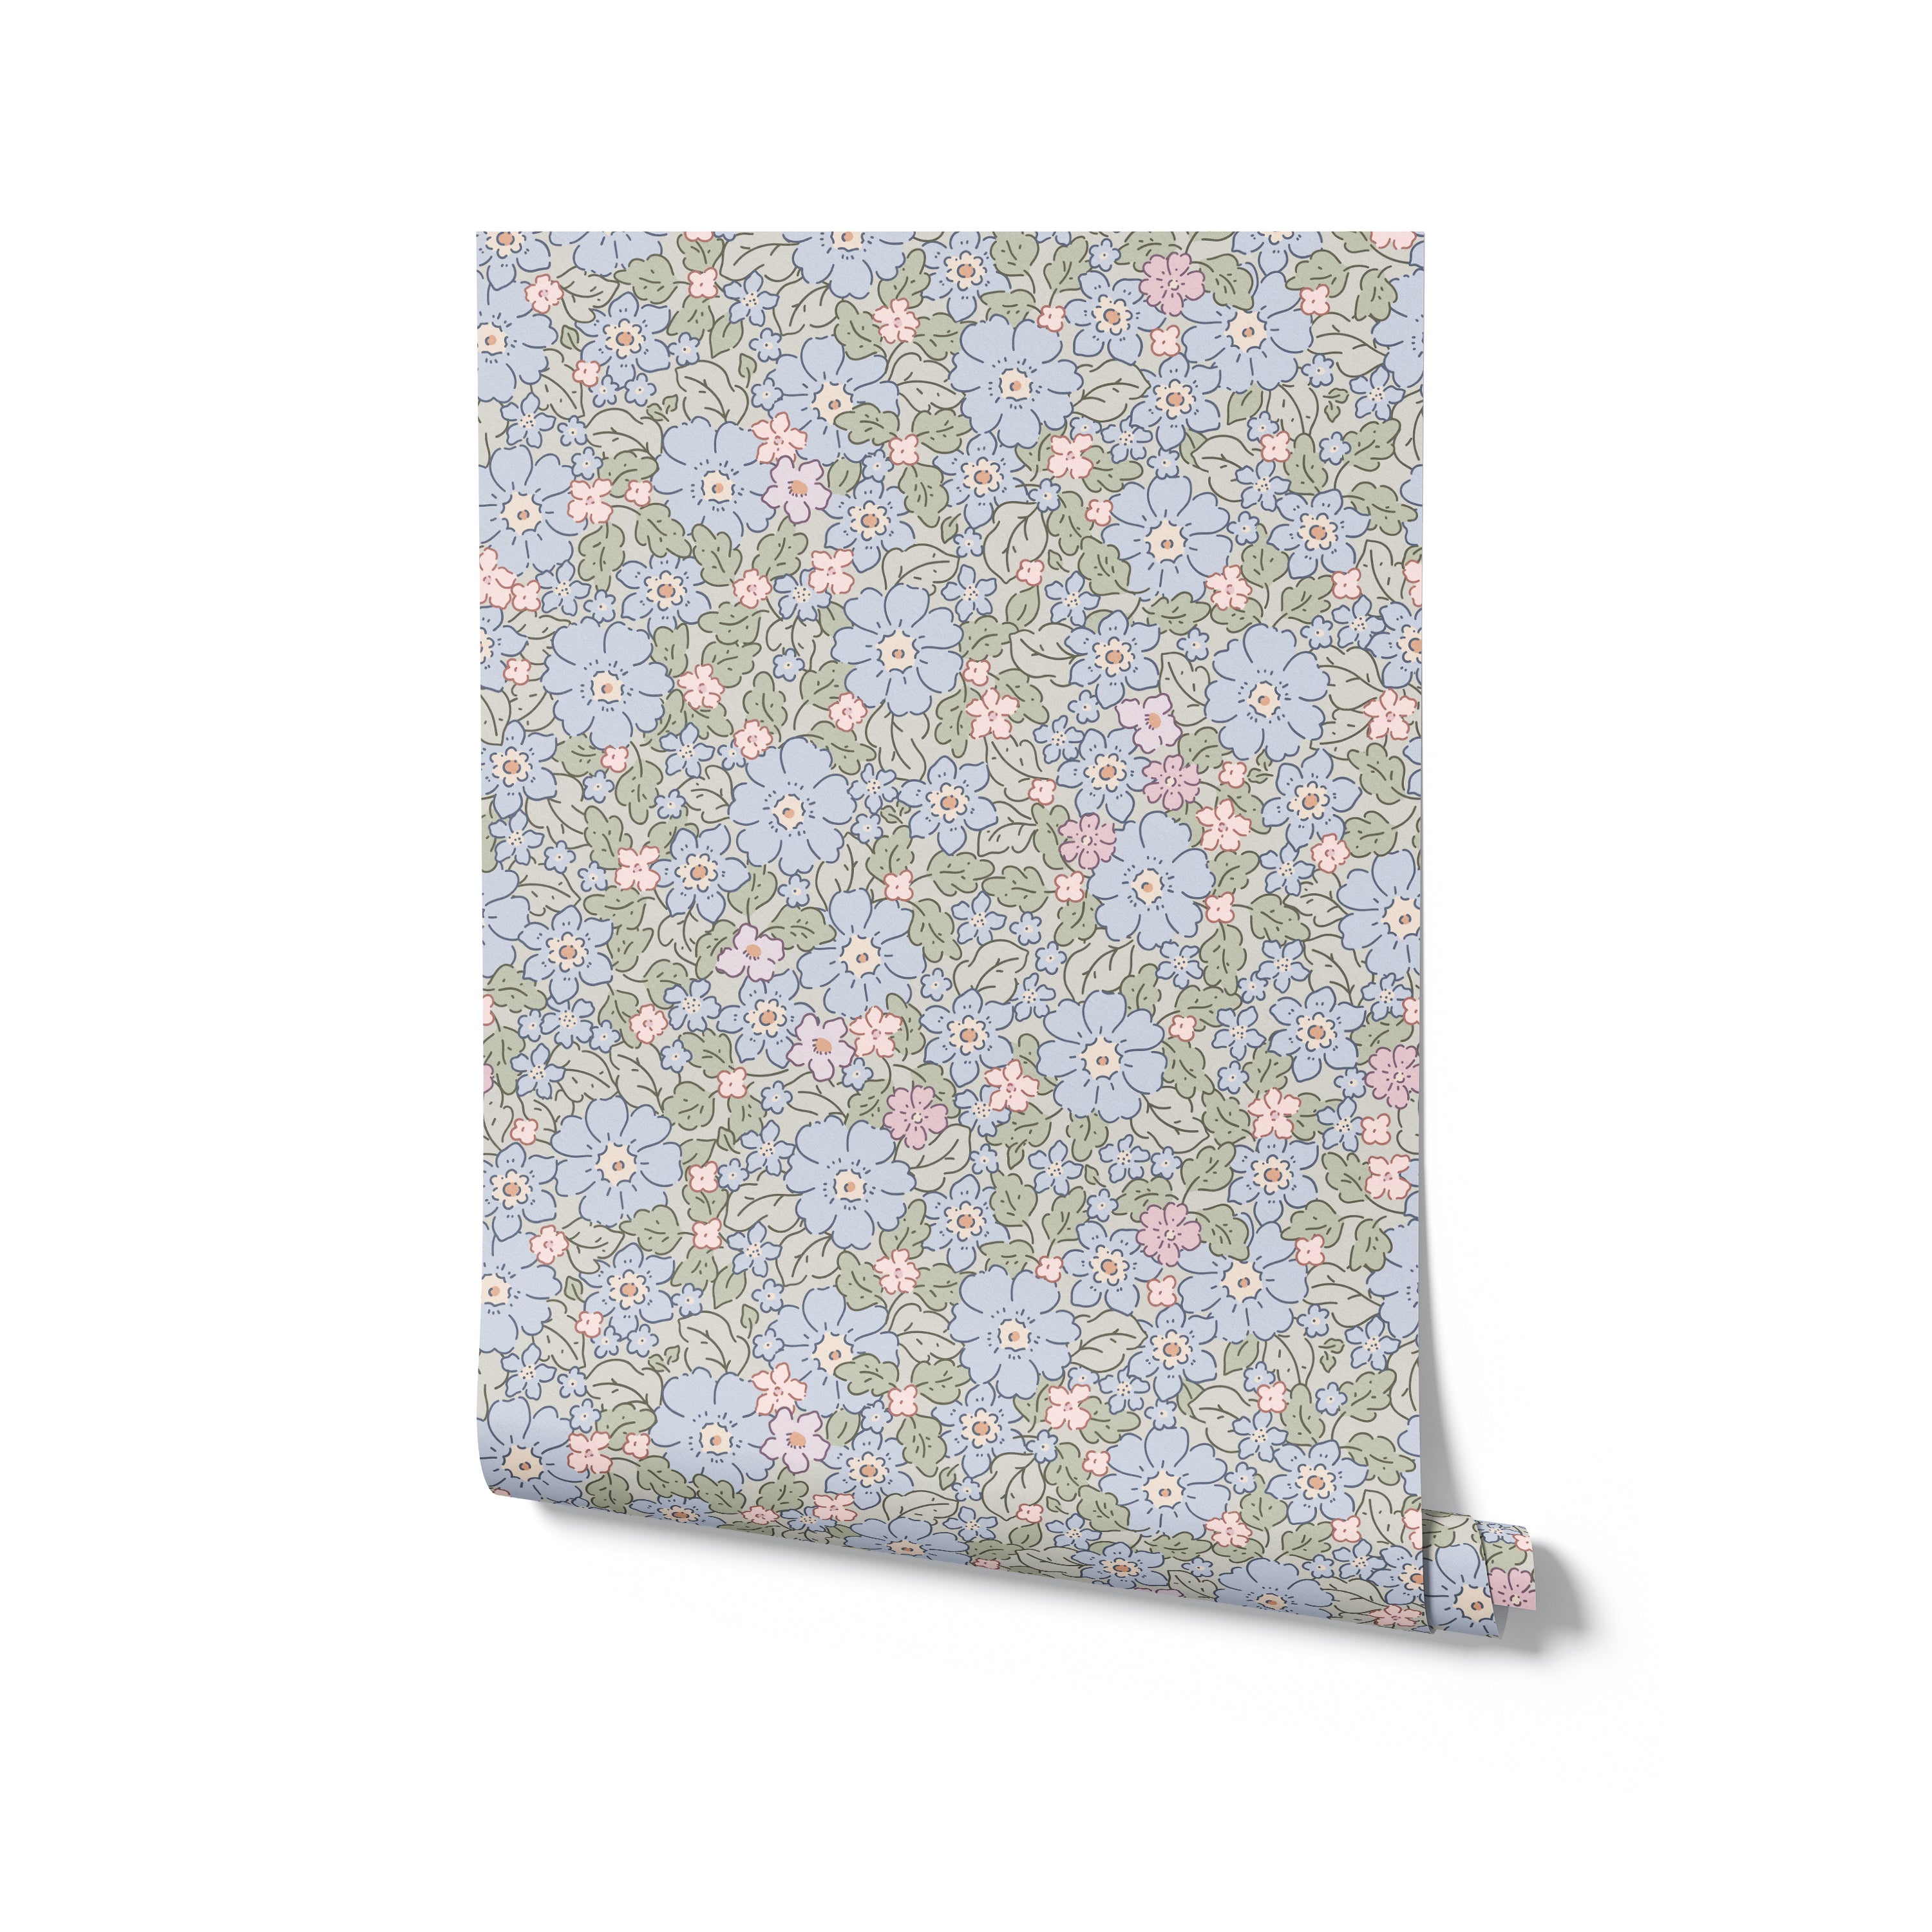 A roll of Joie Wallpaper presented against a white background, depicting a lush pattern of blue and pink flowers with green foliage on a light green base. This wallpaper offers a delightful burst of color, ideal for bringing life and vibrancy to any interior space.